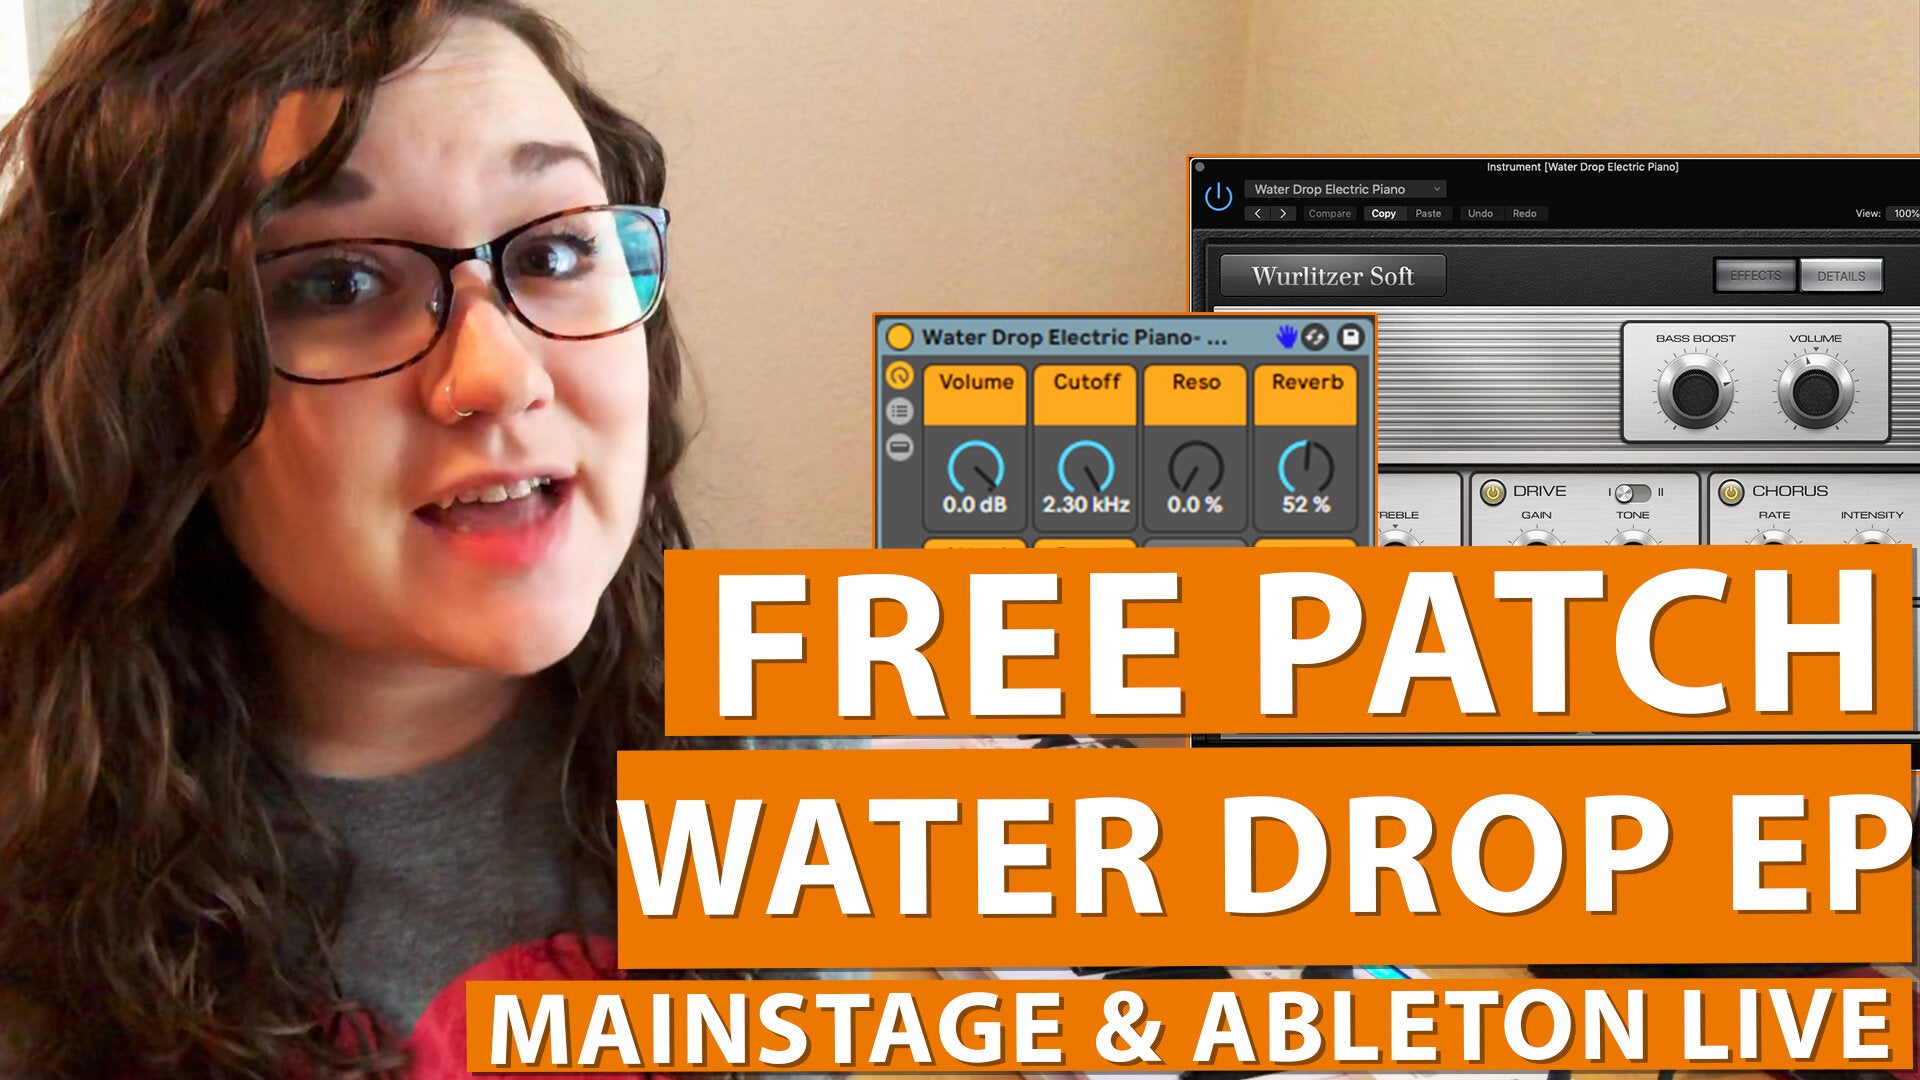 Free MainStage & Ableton Worship Patch! - Water Drop EP